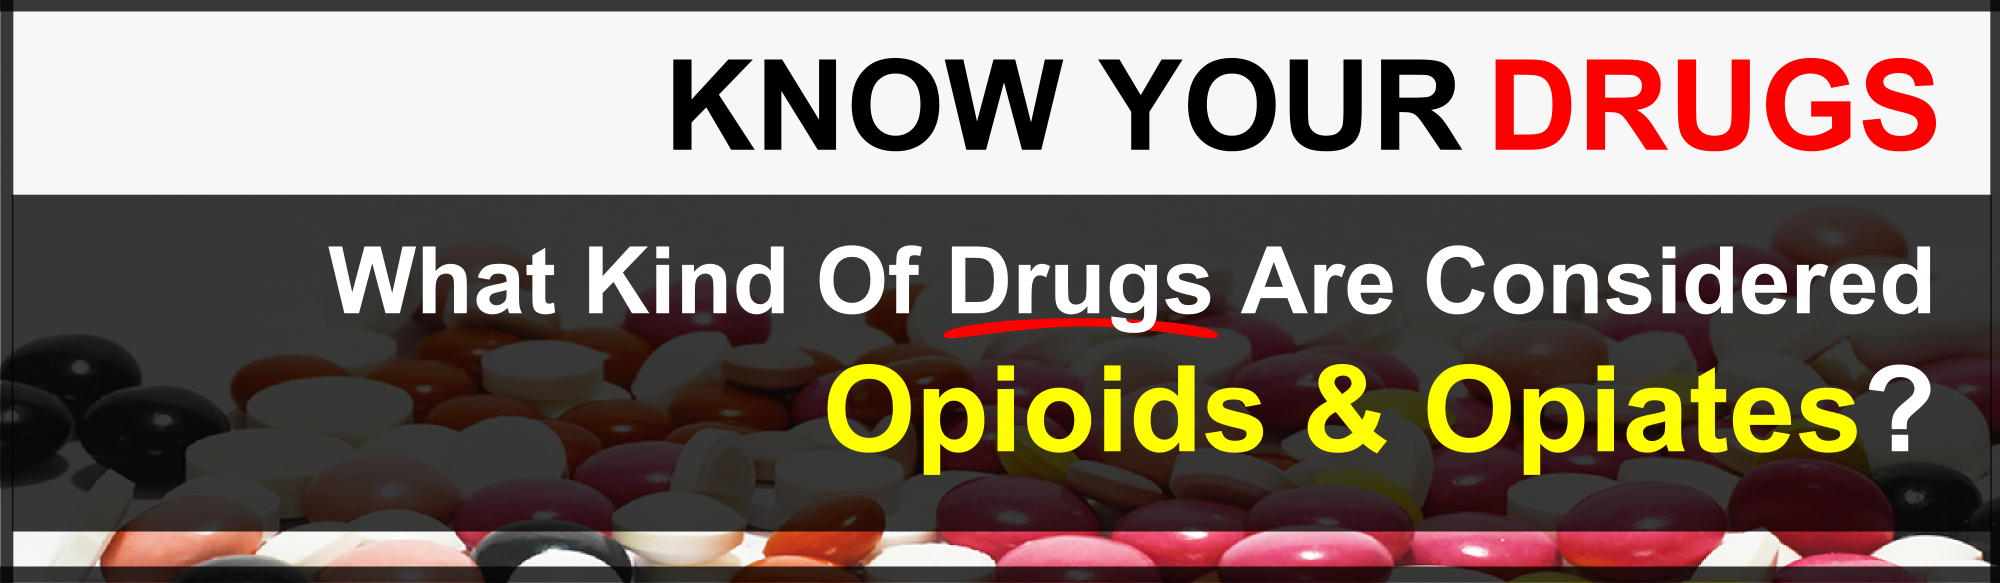 What Kind Of Drugs Are Opioids and Opiates